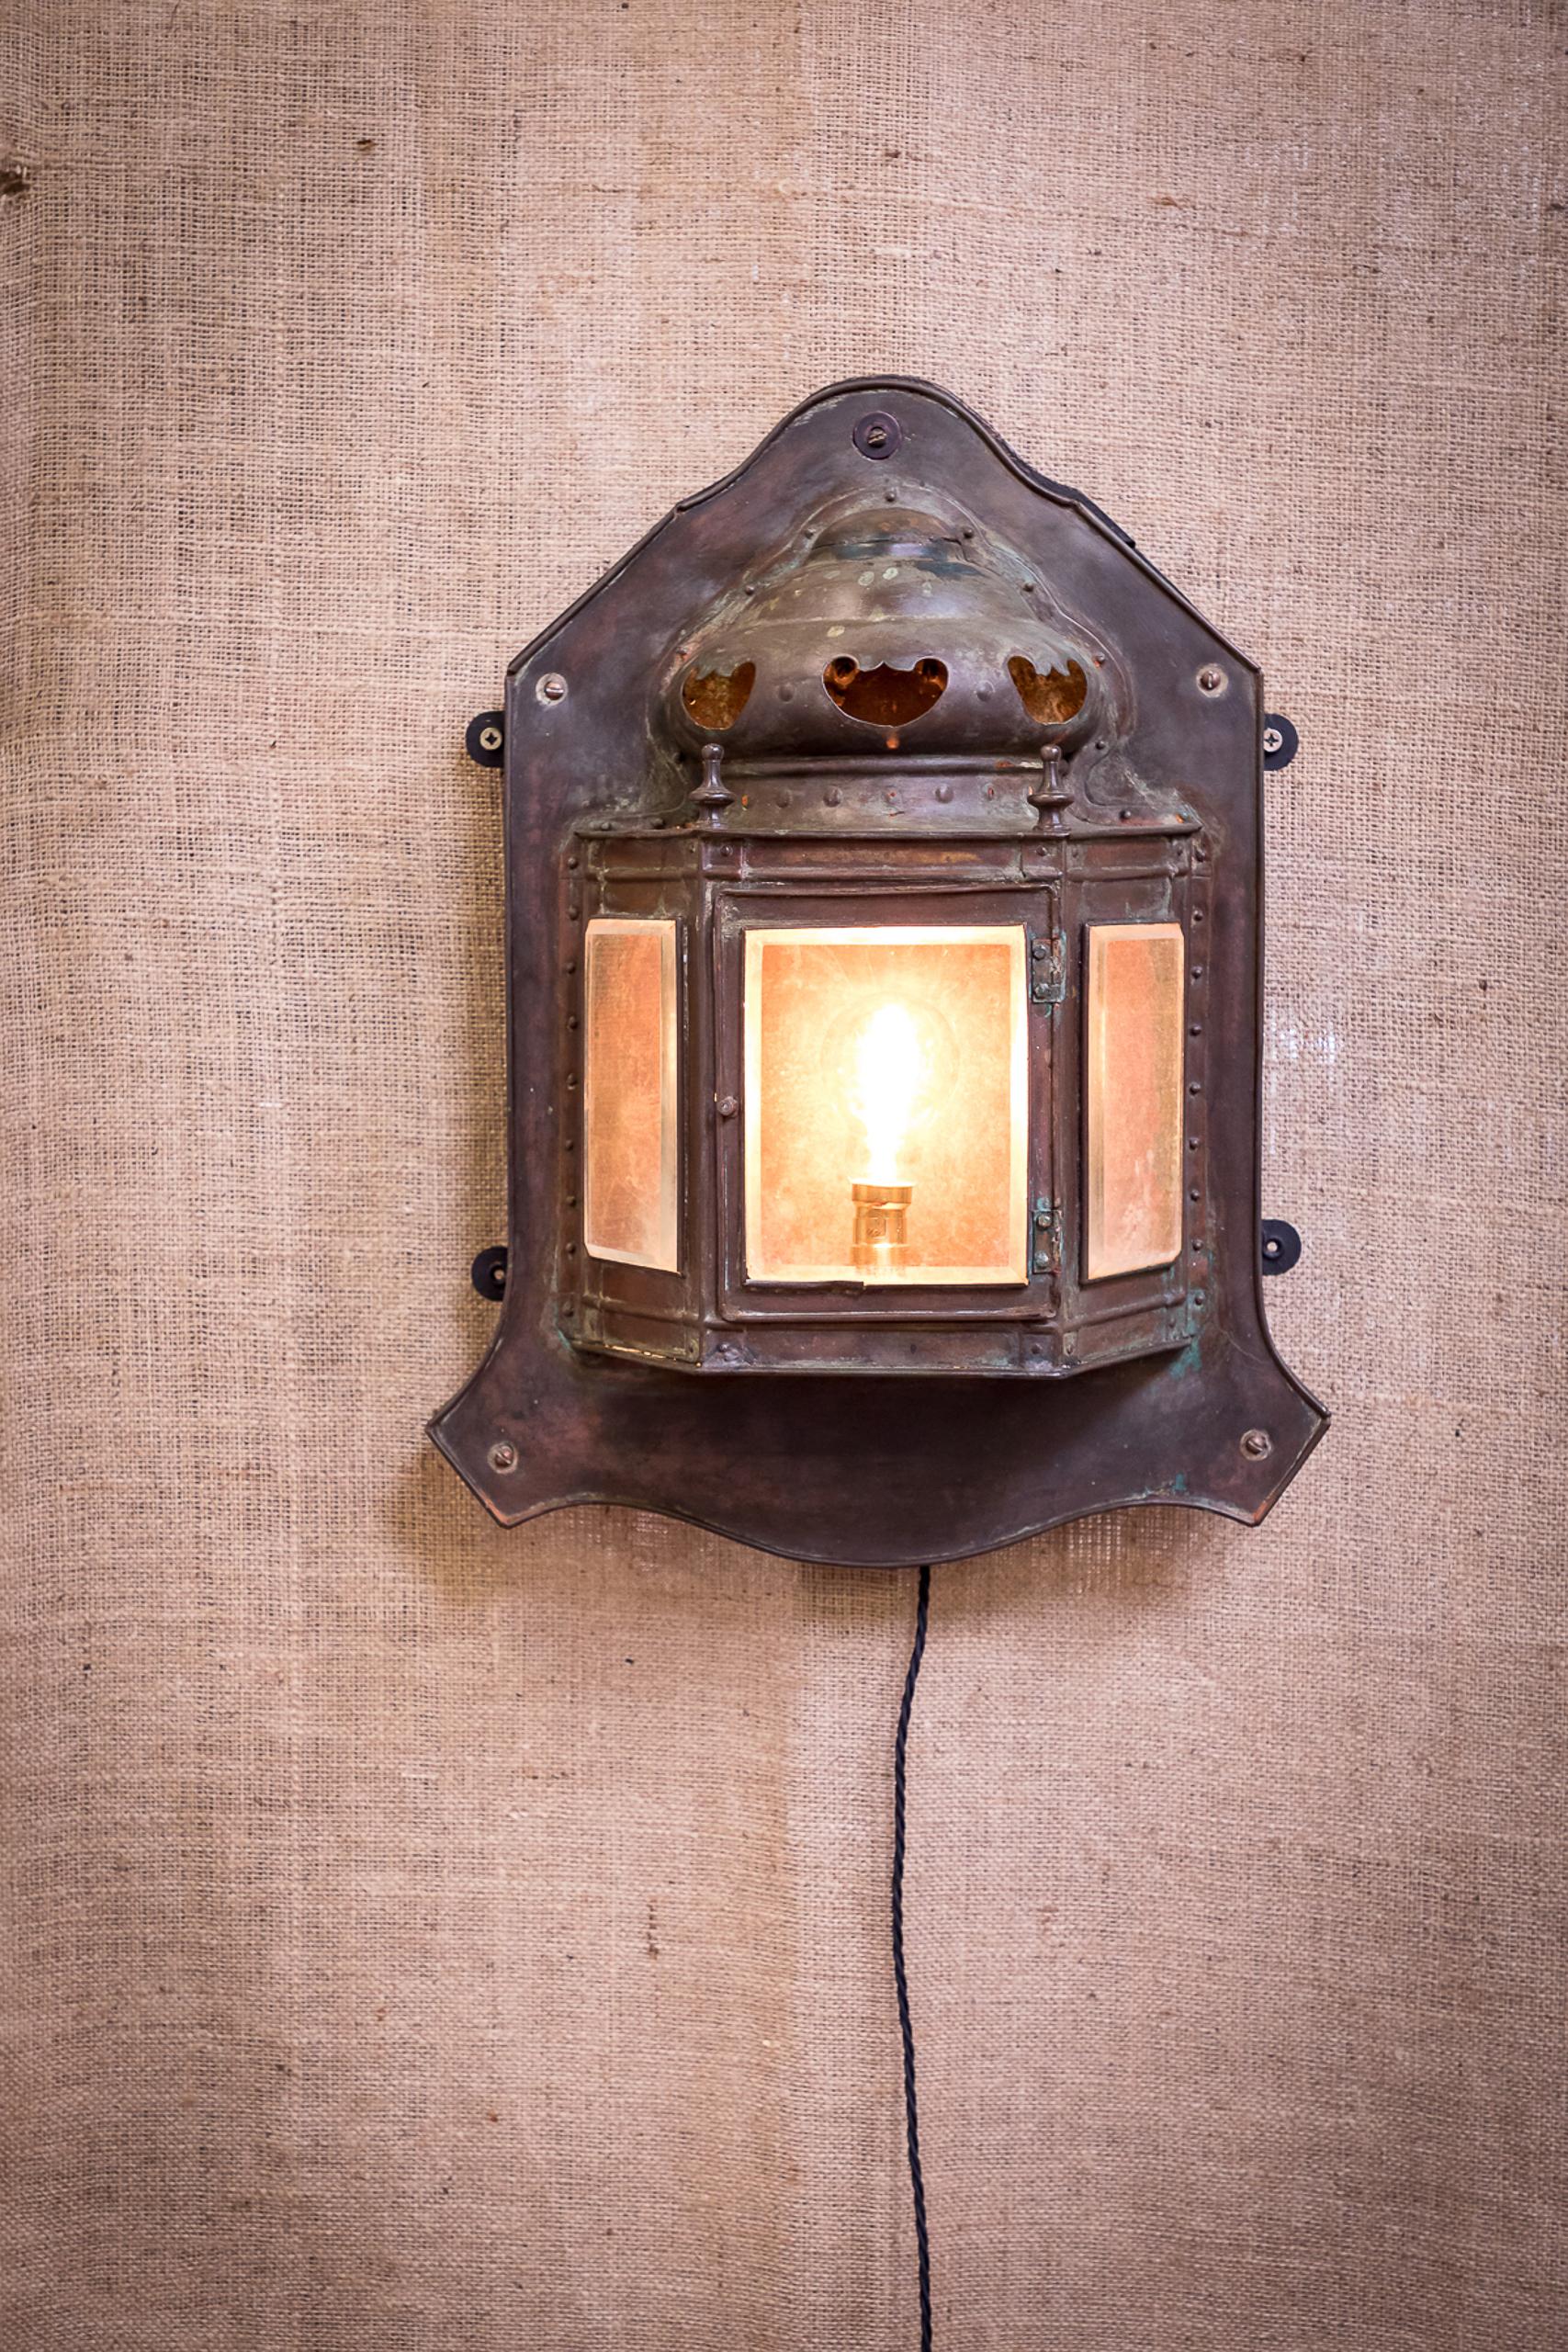 A beautiful copper wall light dating to the early 20th century.
This copper wall lantern has been fully restored, rewired and PAT tested.
The light has a central glazed door for access to the bulb and electrical fittings flanked by two further